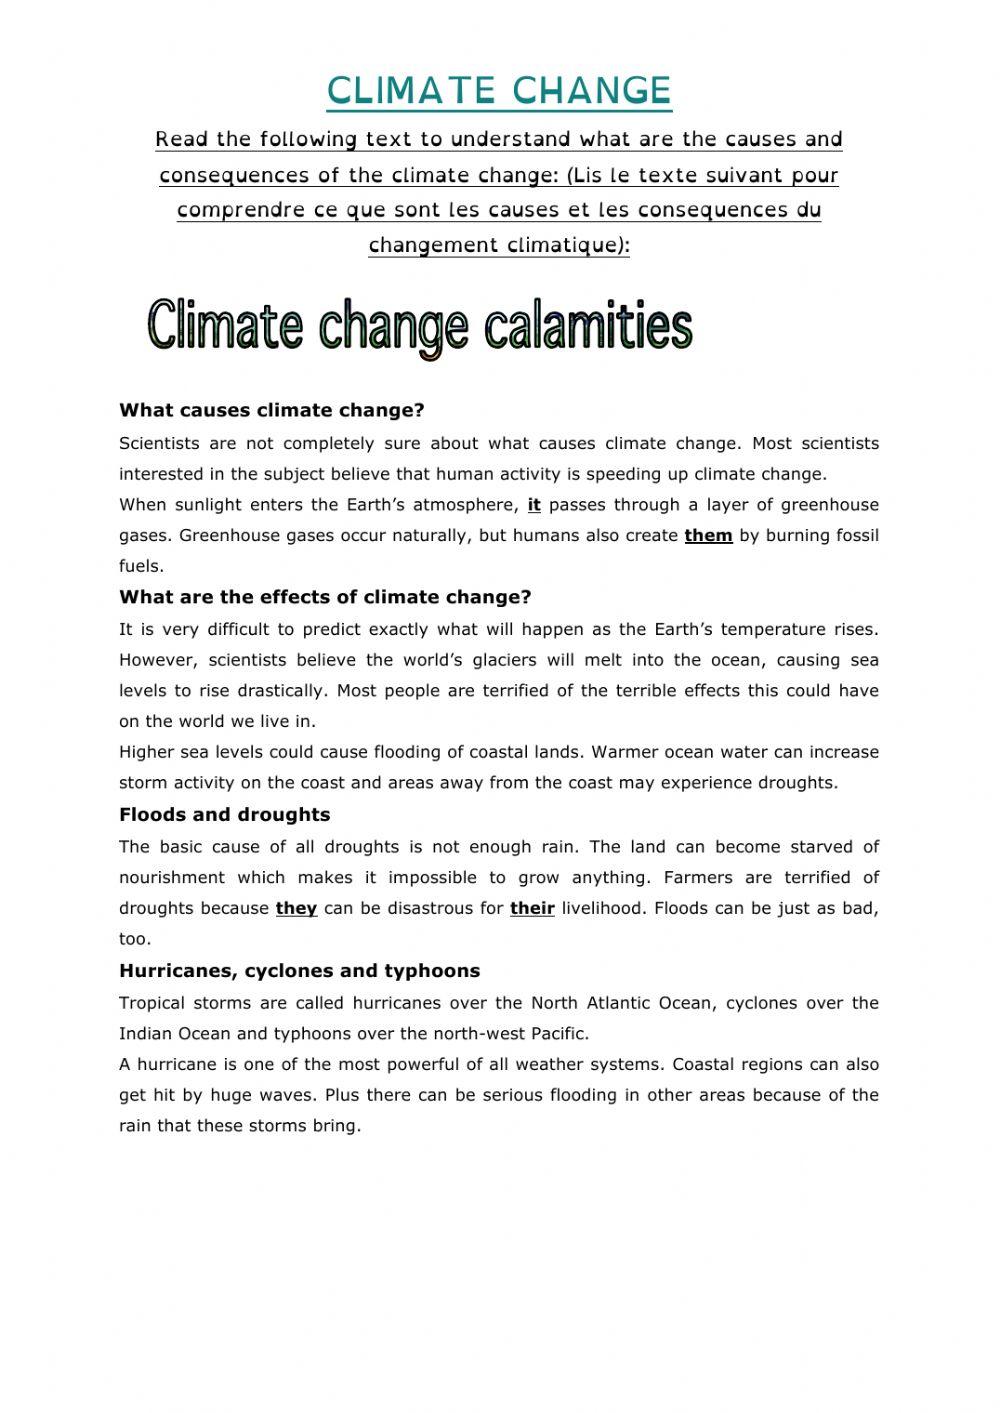 The causes and the effects of teh climate change